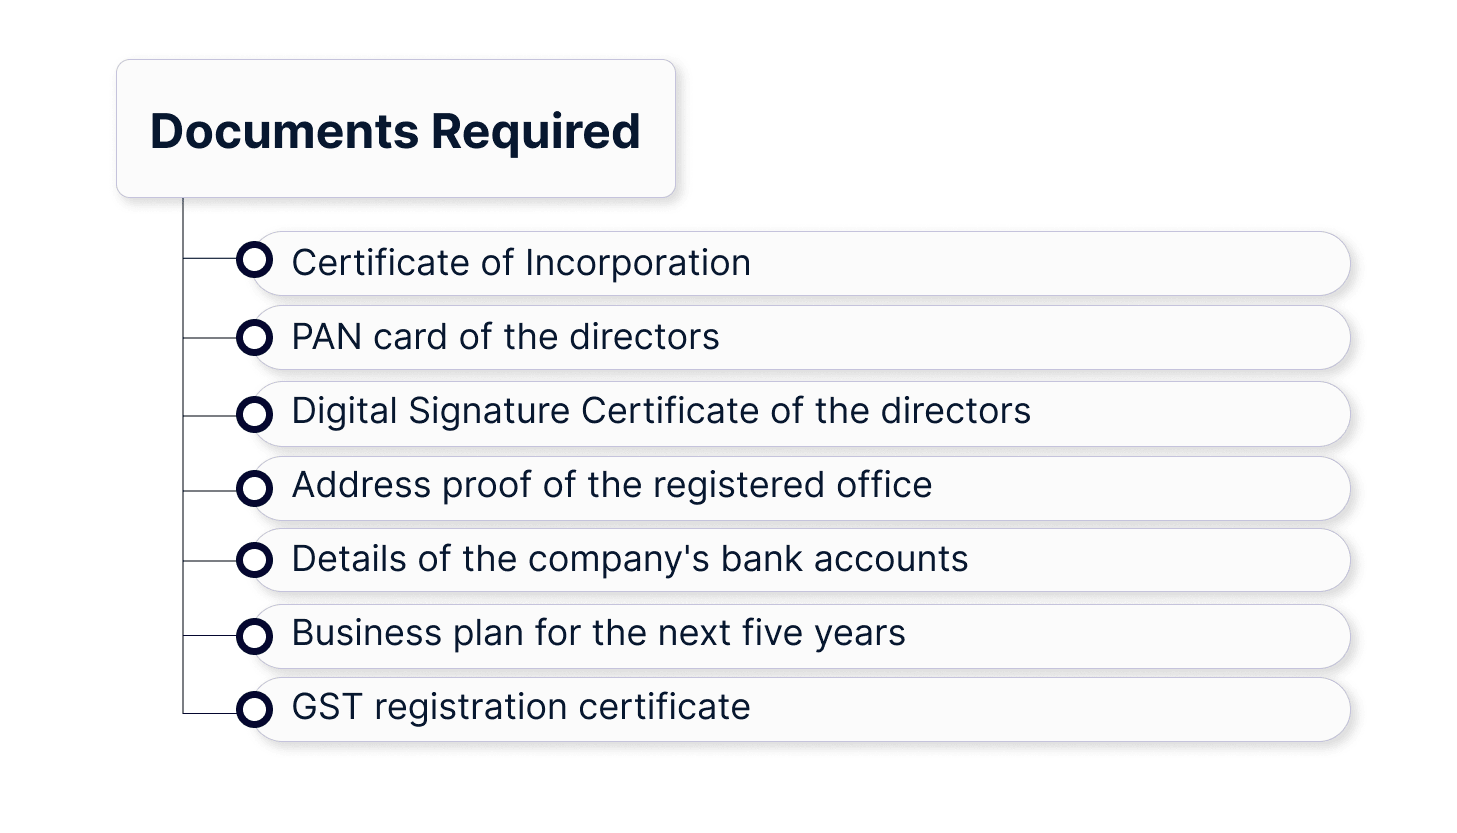 Documents Required for Payment Gateway License in India